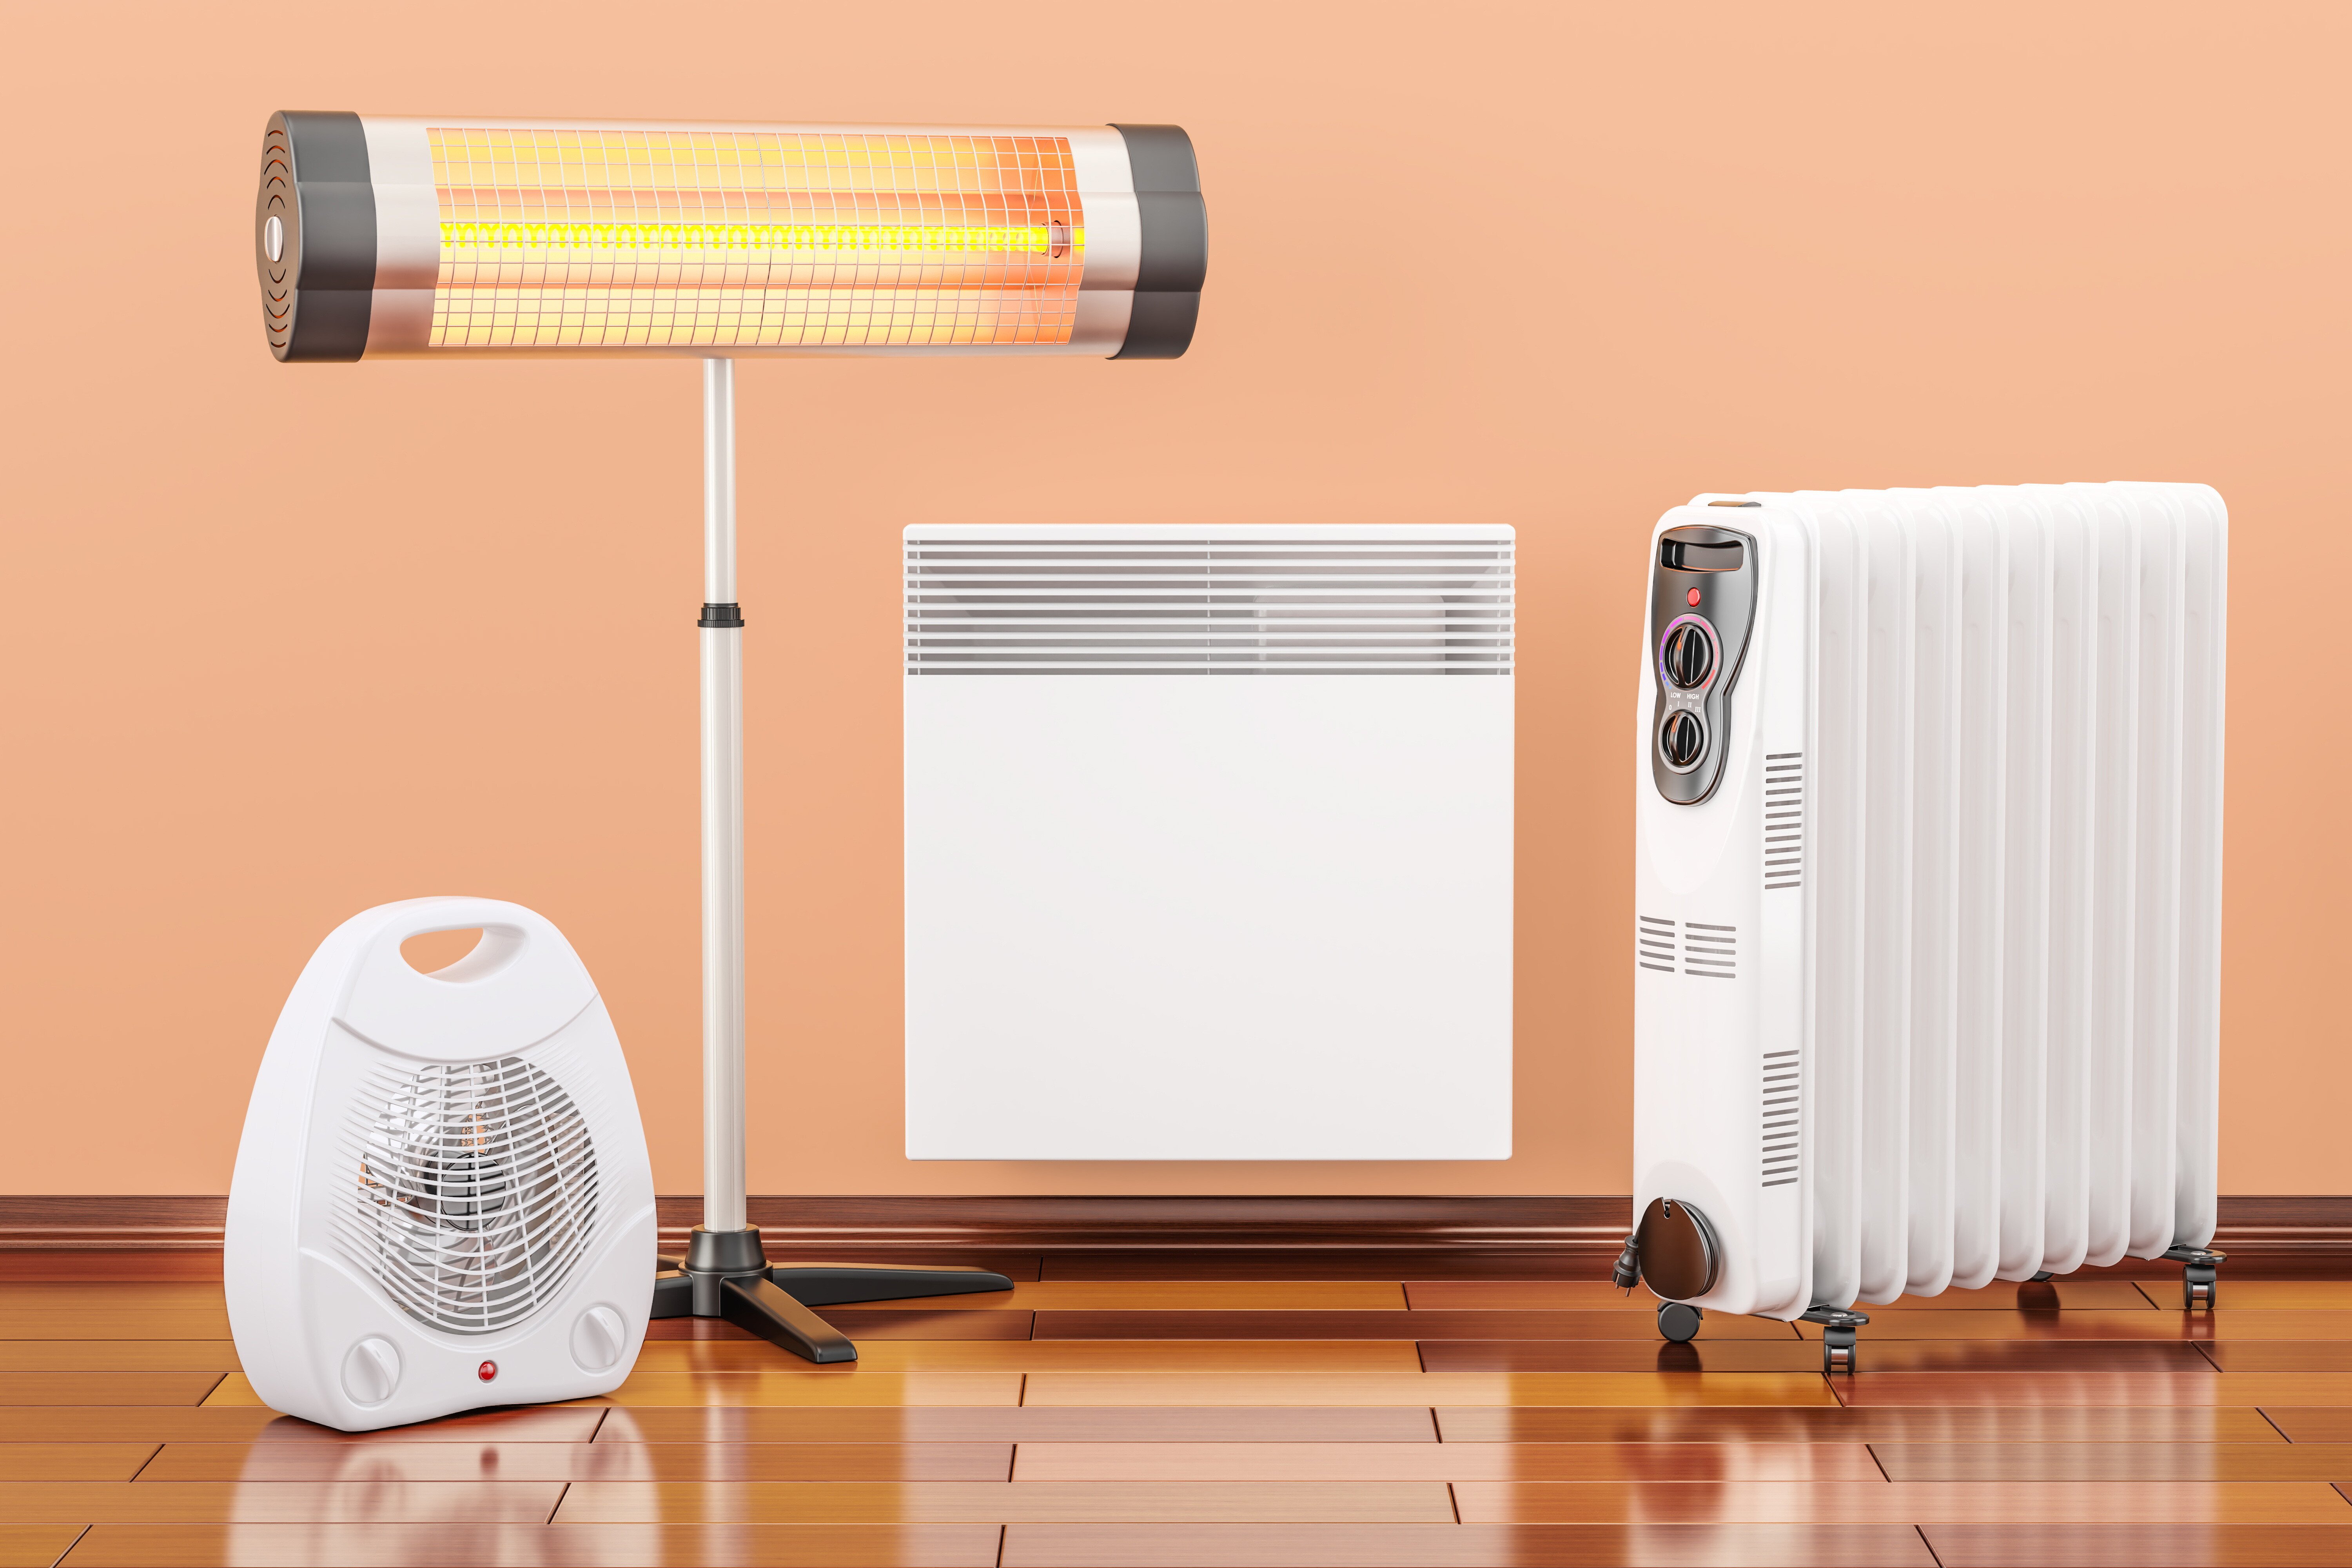 A variety of small electric heaters